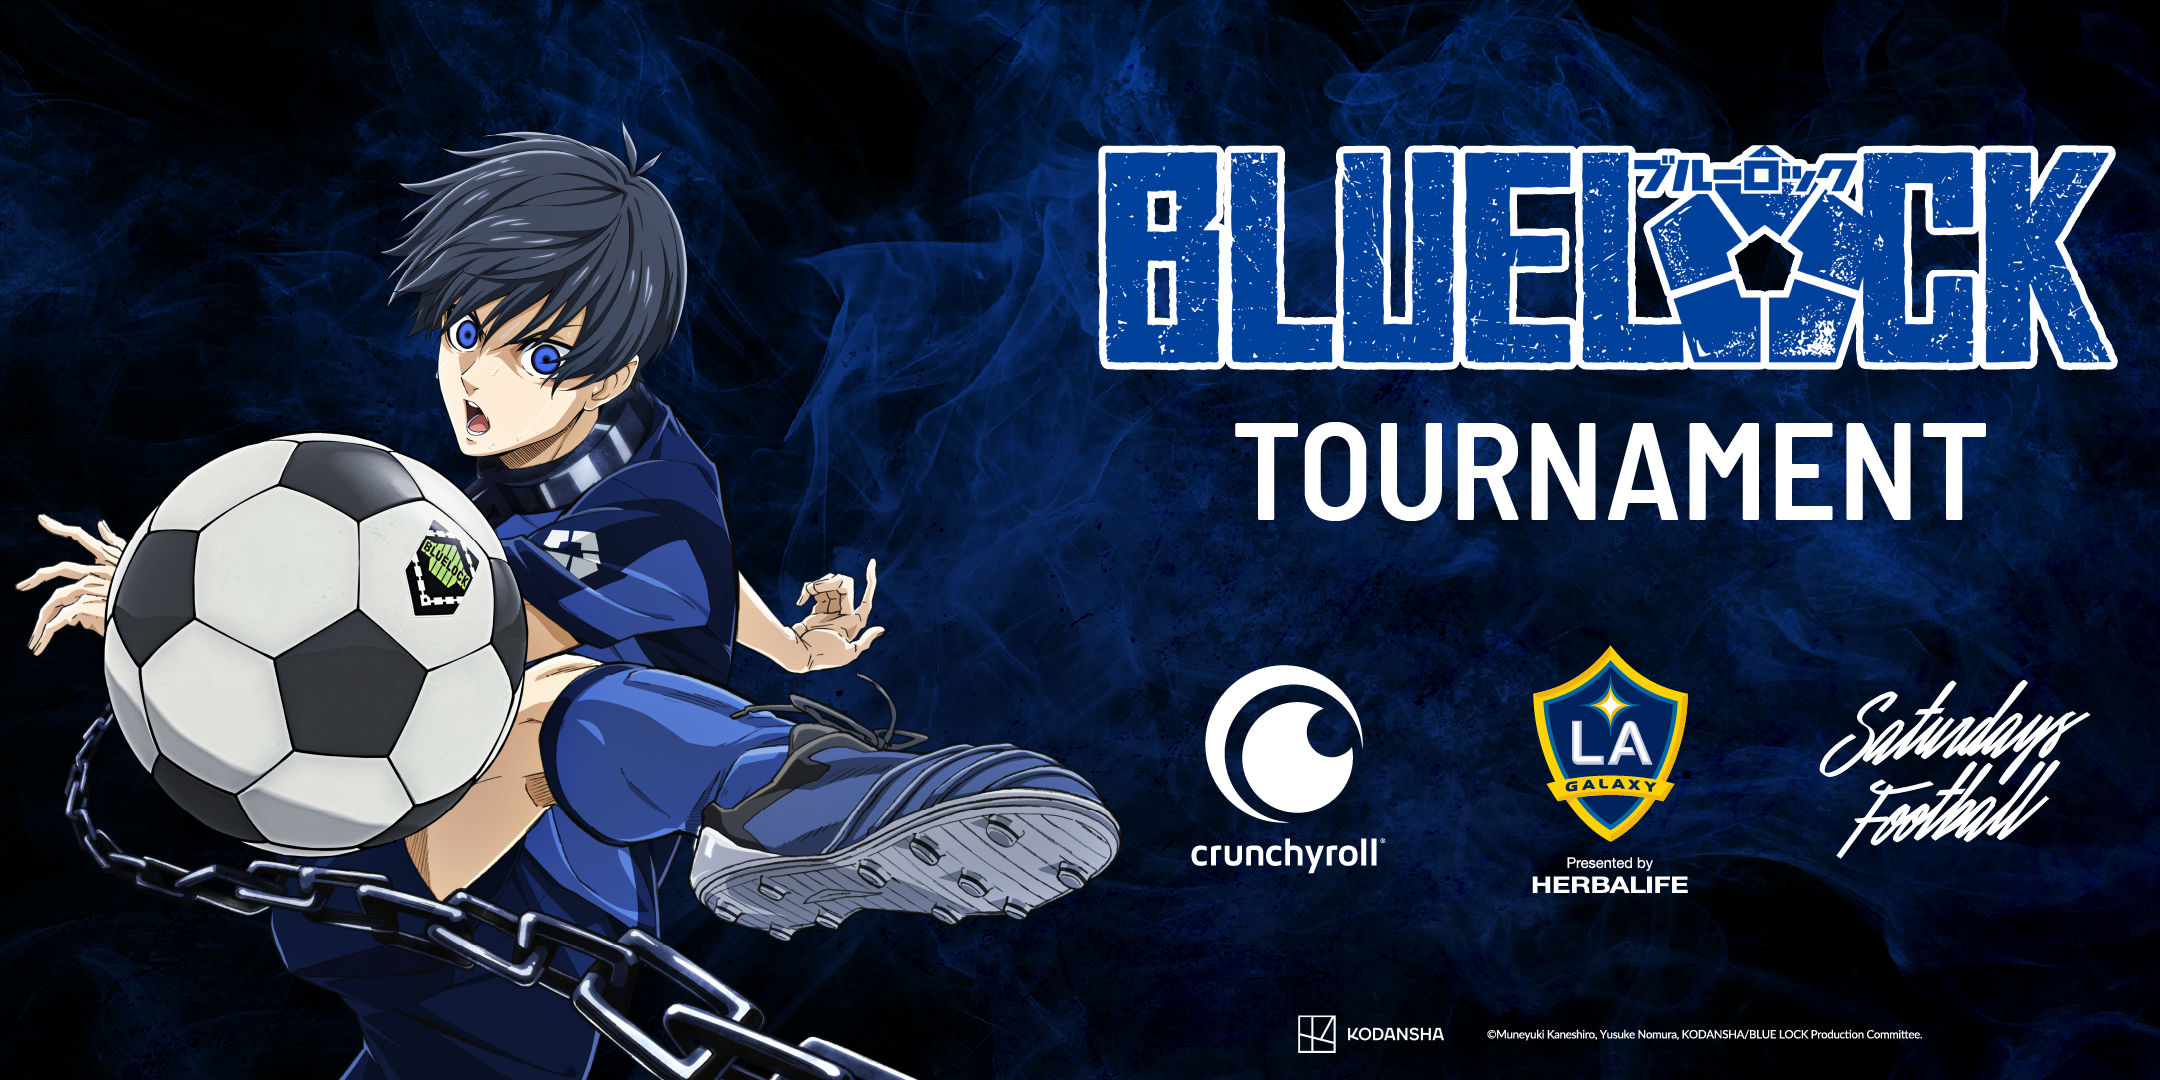 Real-Life BLUELOCK Soccer Tournament Coming From Crunchyroll, Saturdays Football and LA Galaxy